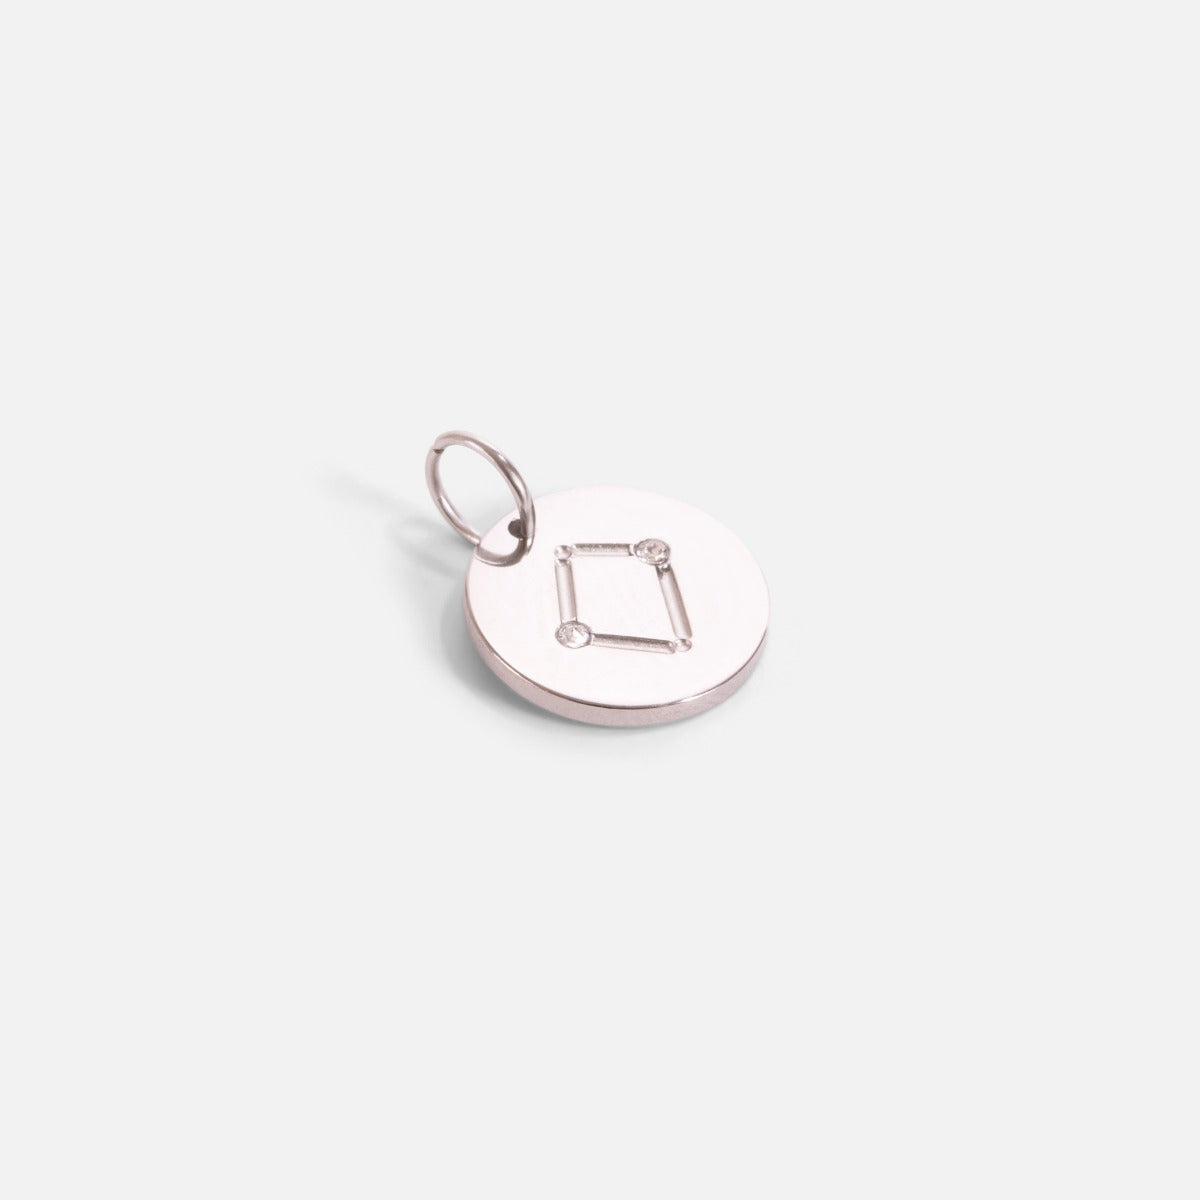 Small silvered charm engraved with the zodiac constellation "libra"